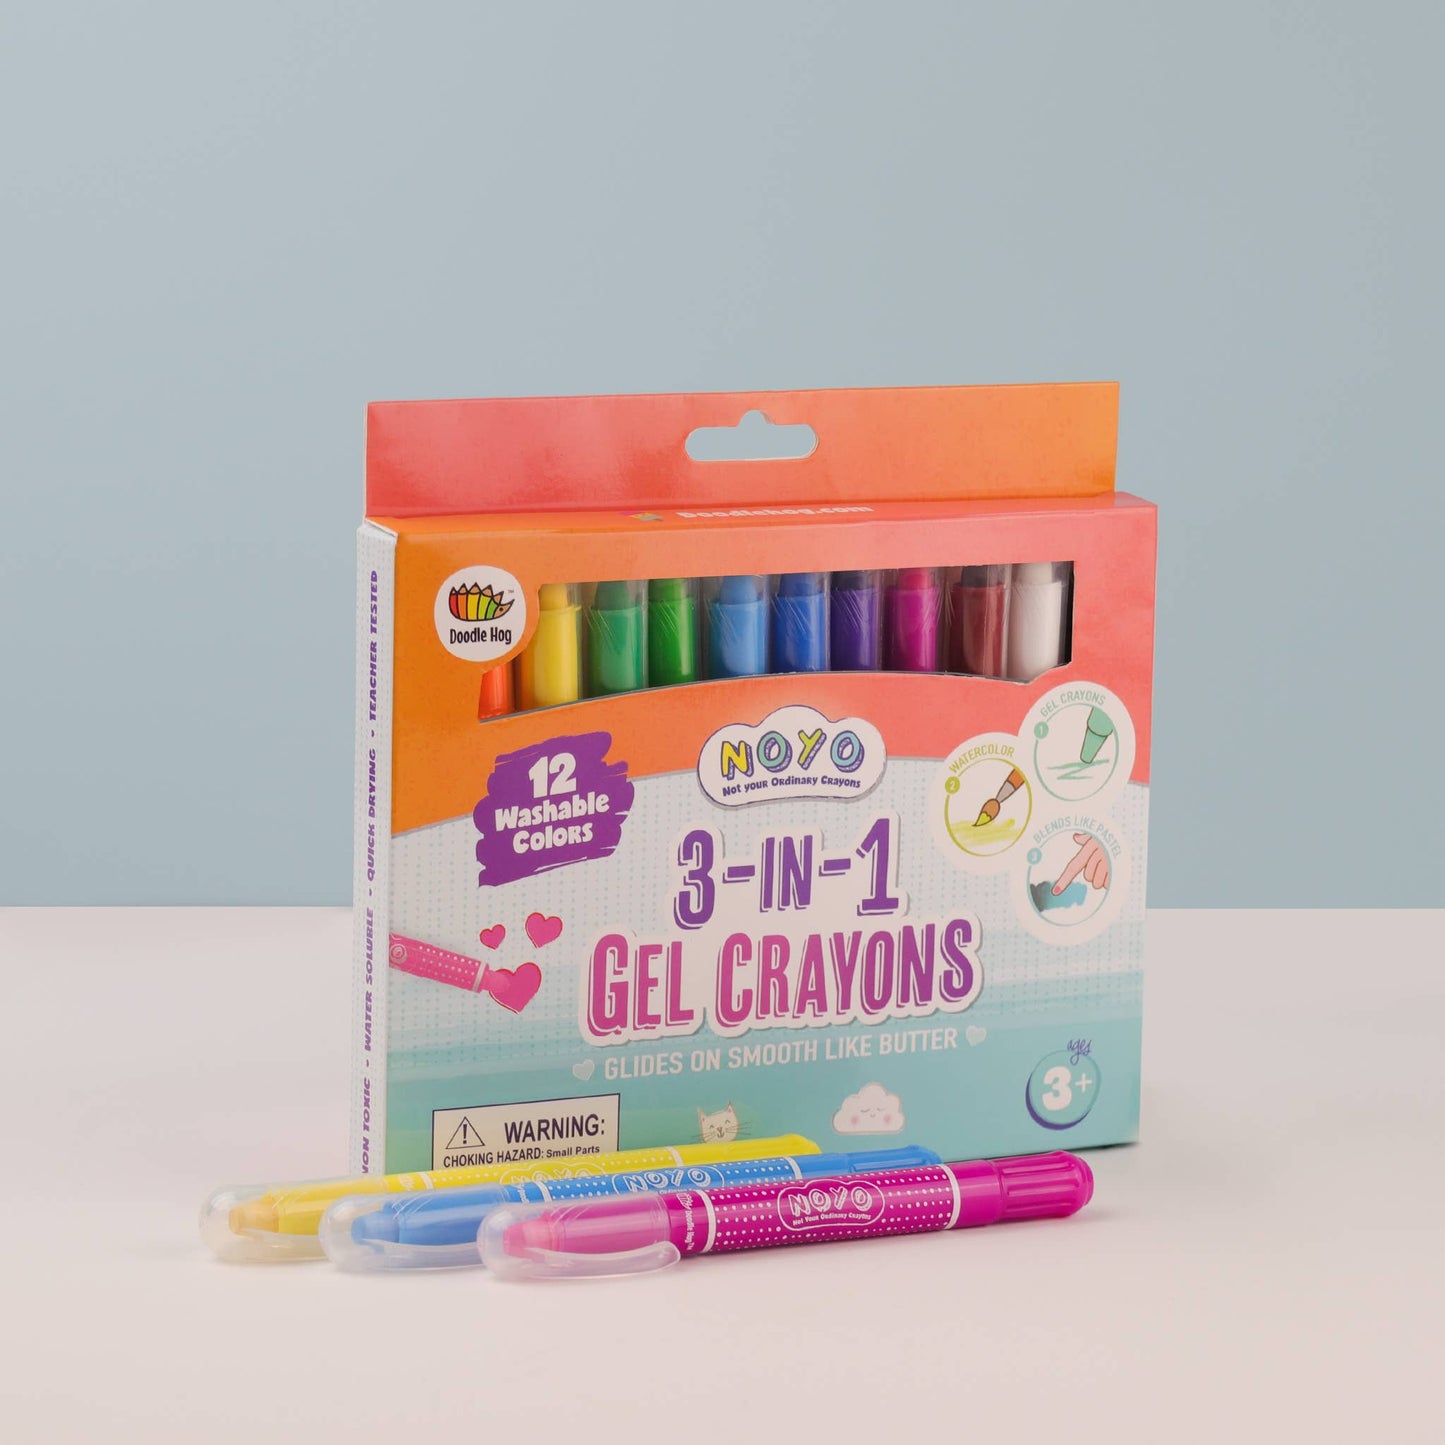 Not Your Ordinary Crayons - 12 Colors Gel Crayons